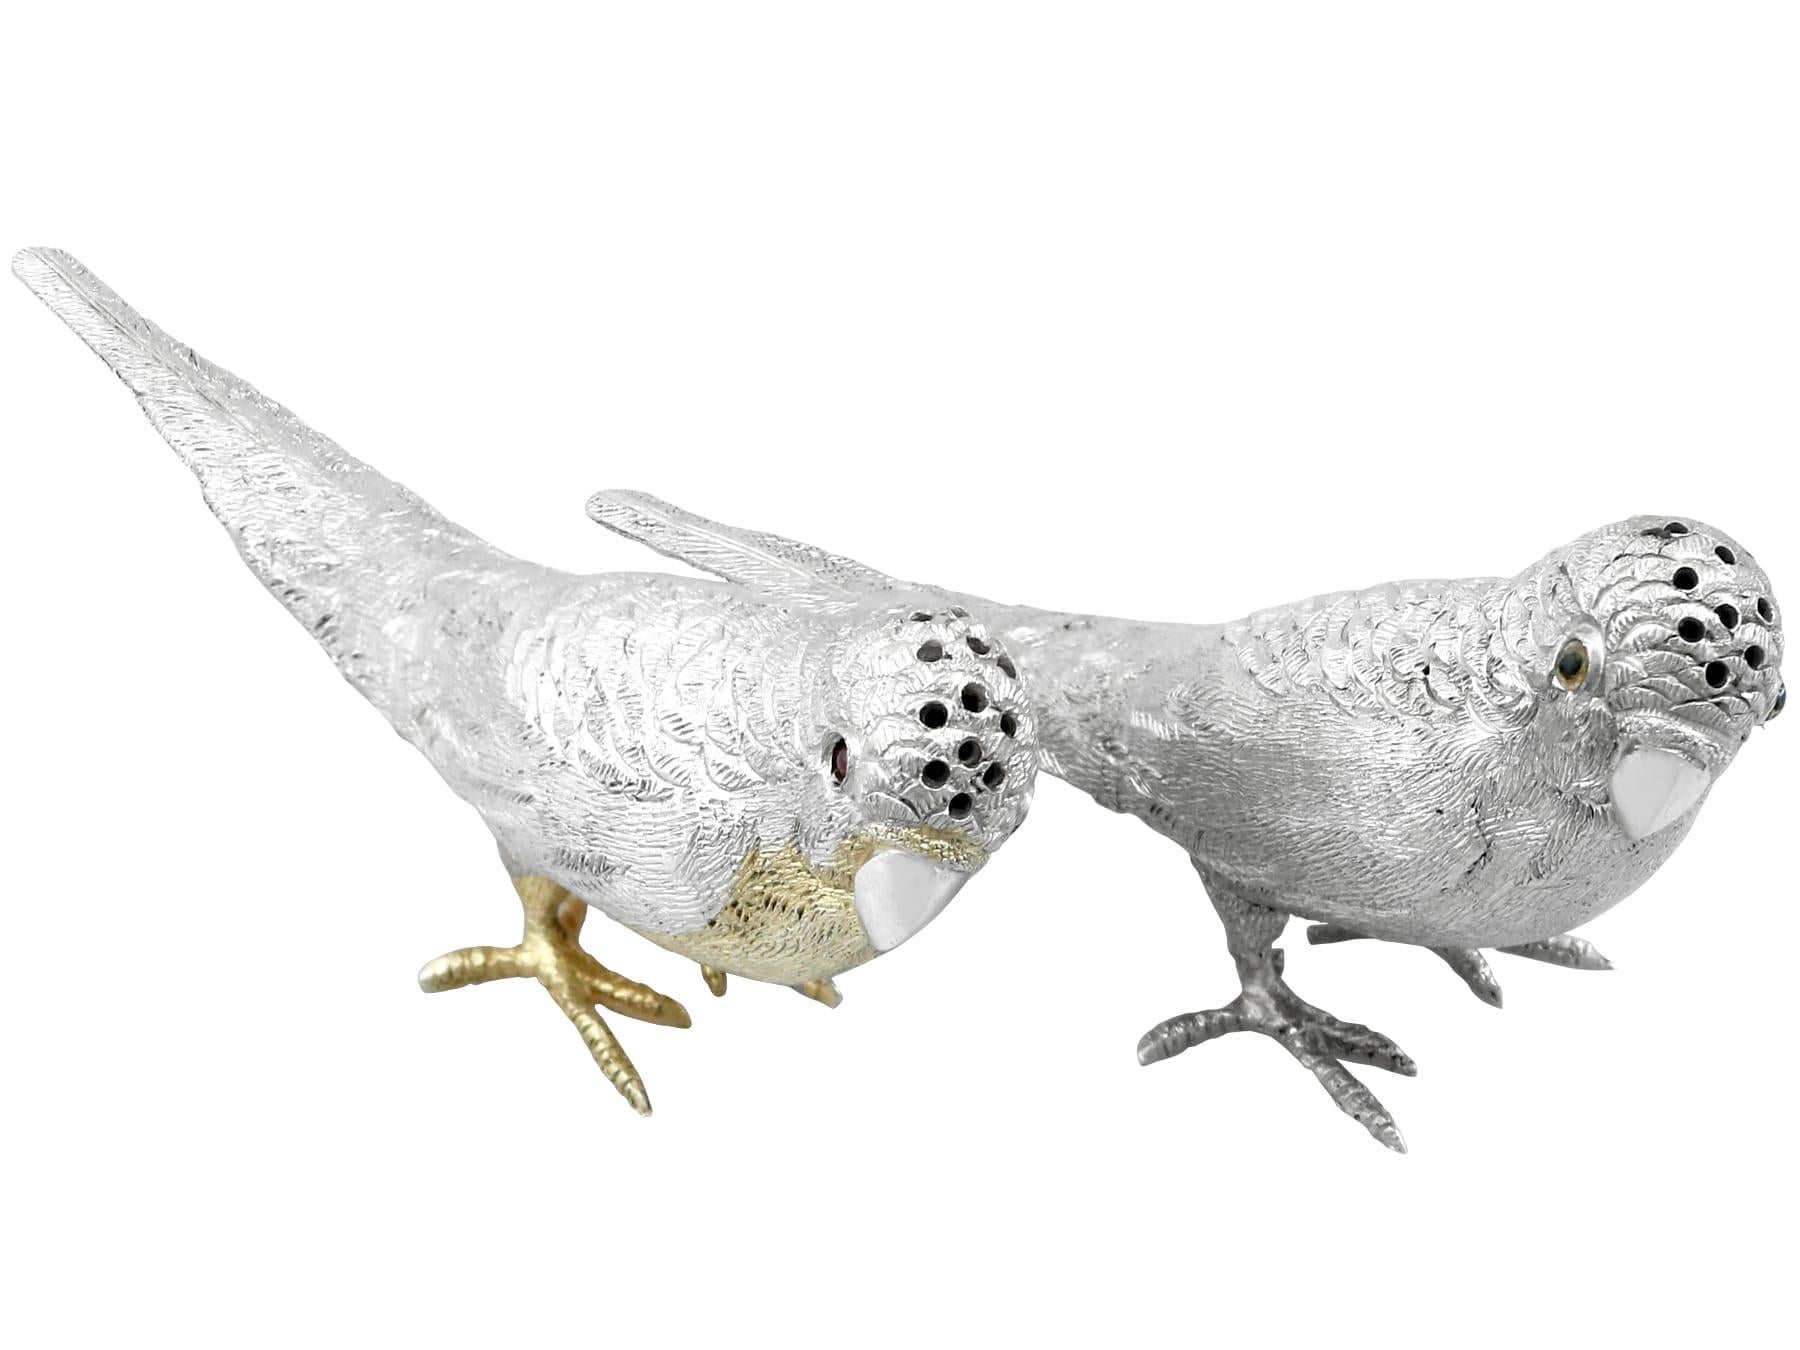 An exceptional, fine and impressive, pair of antique Edwardian English cast sterling silver pepper shakers modelled in the form of budgerigars; an addition to our collectable silver collection.

These exceptional antique cast sterling silver peppers